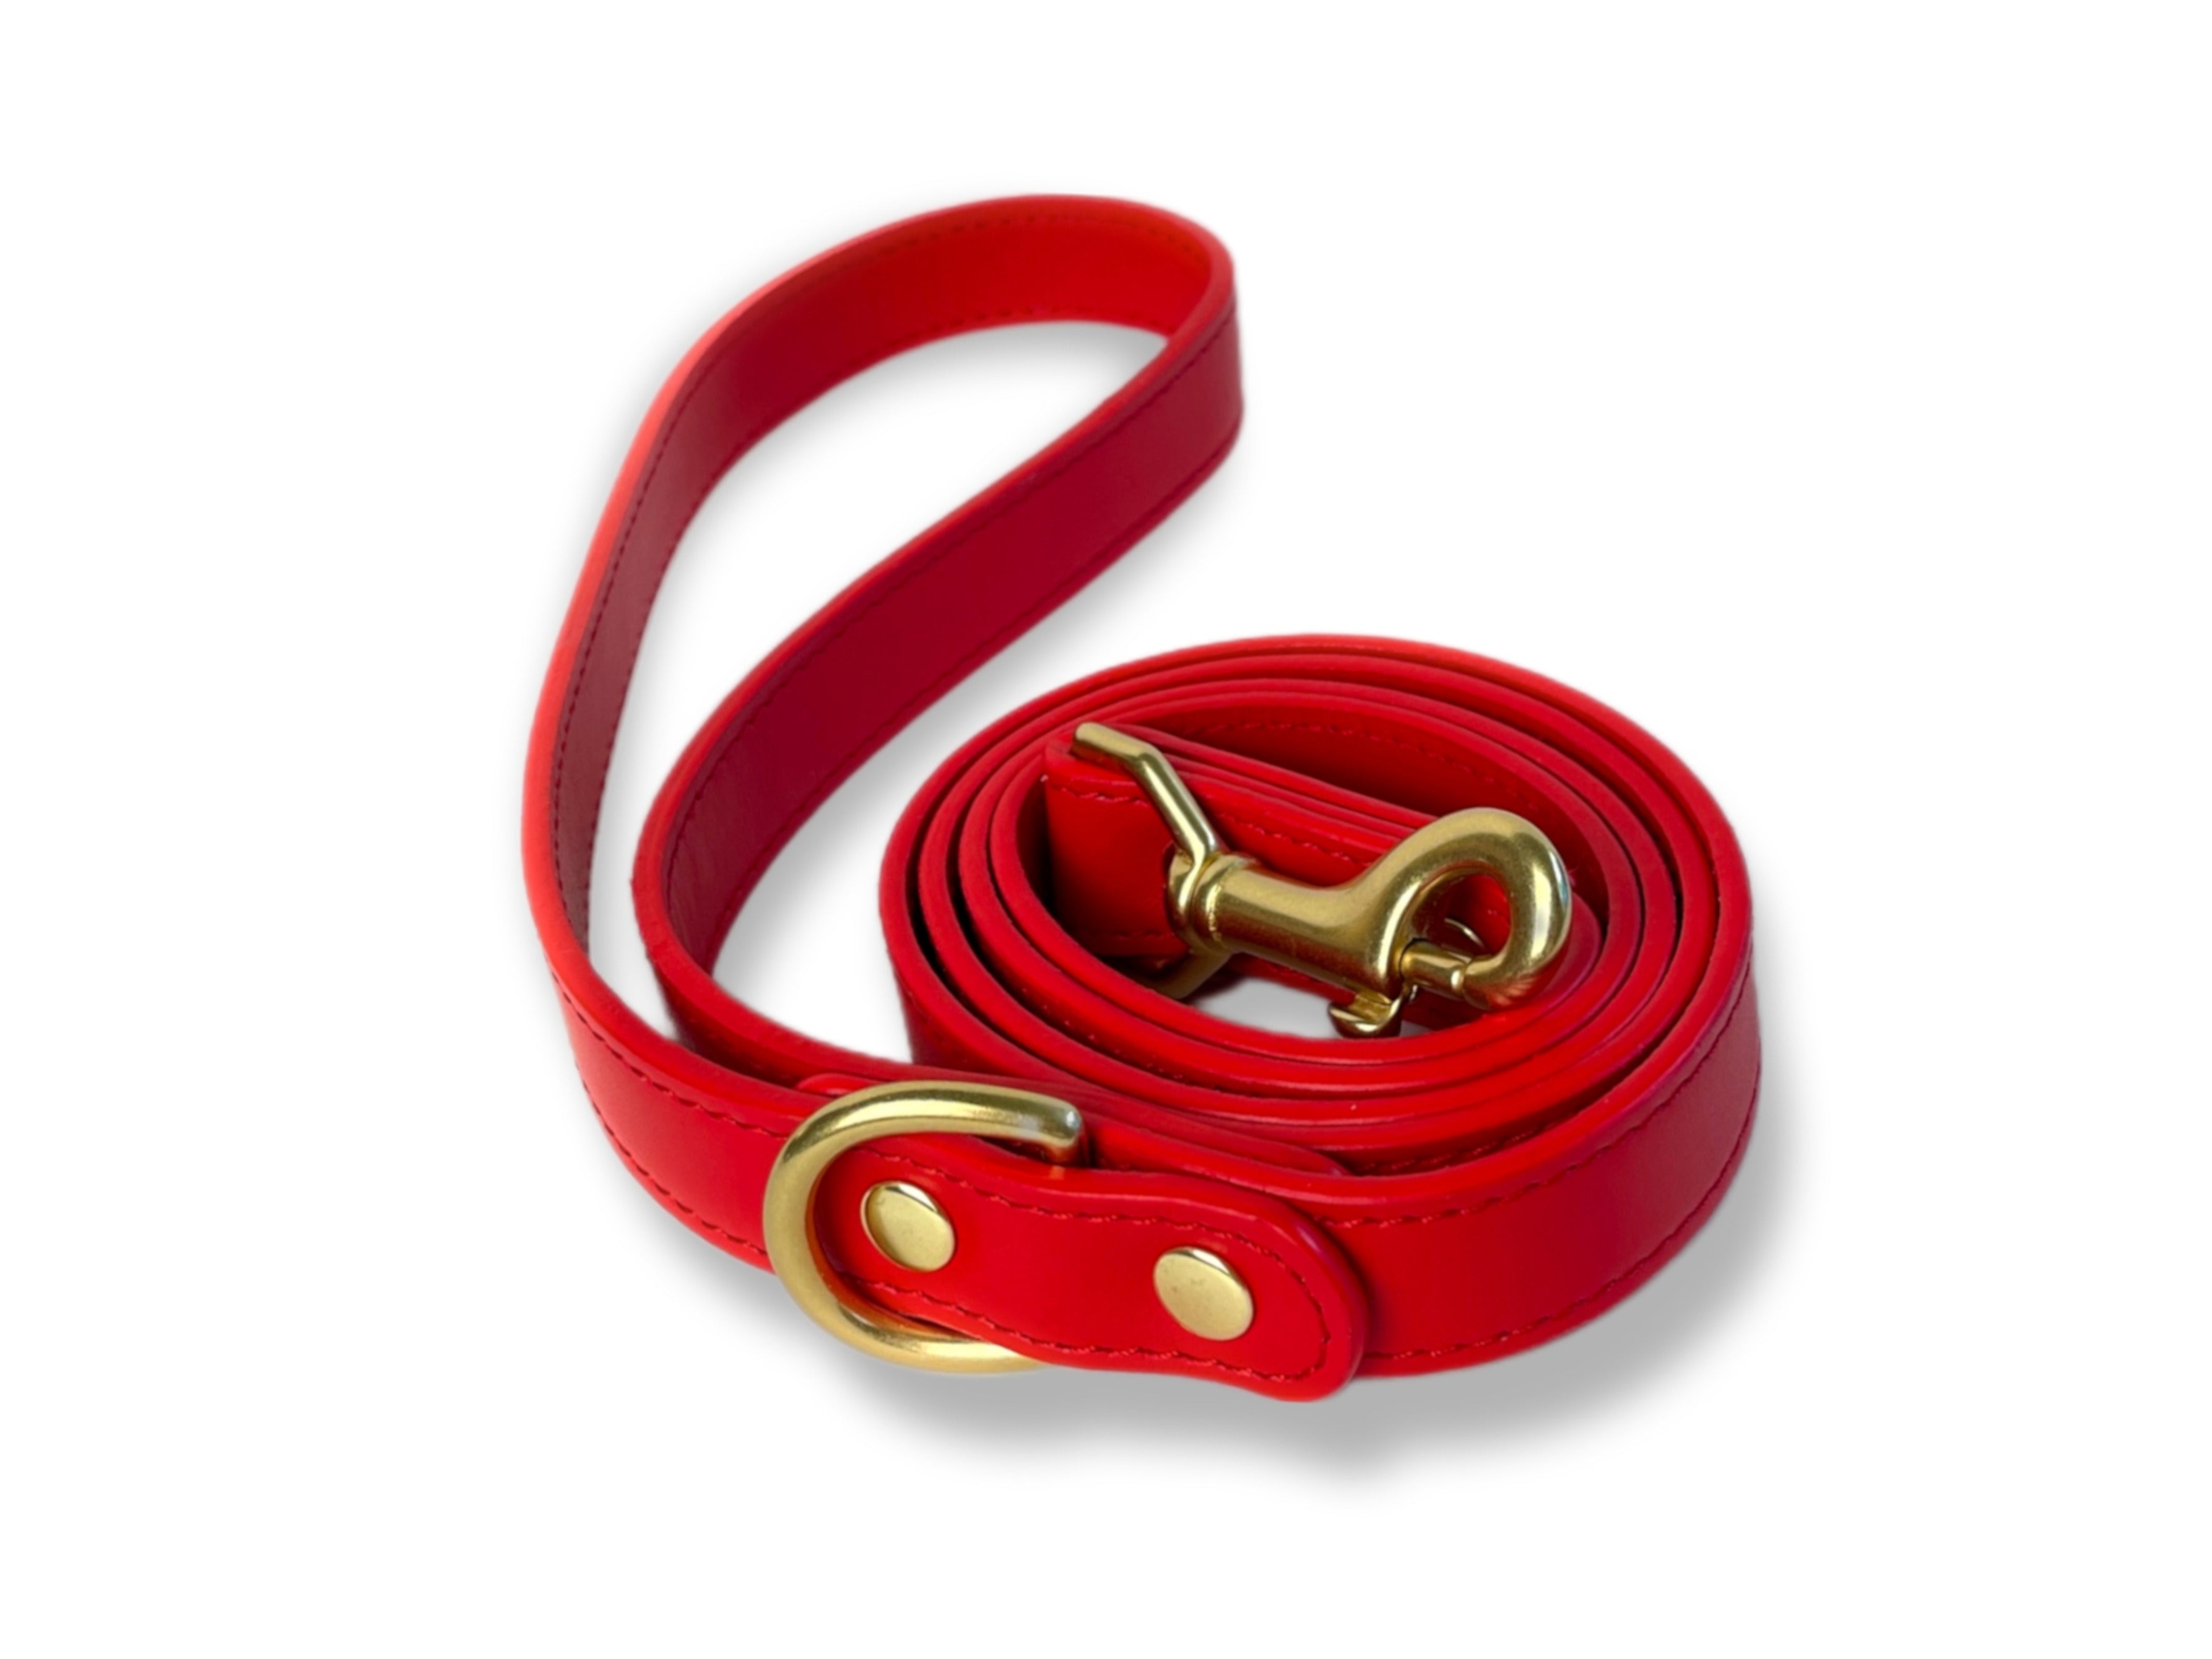 Poppy Red leather leash